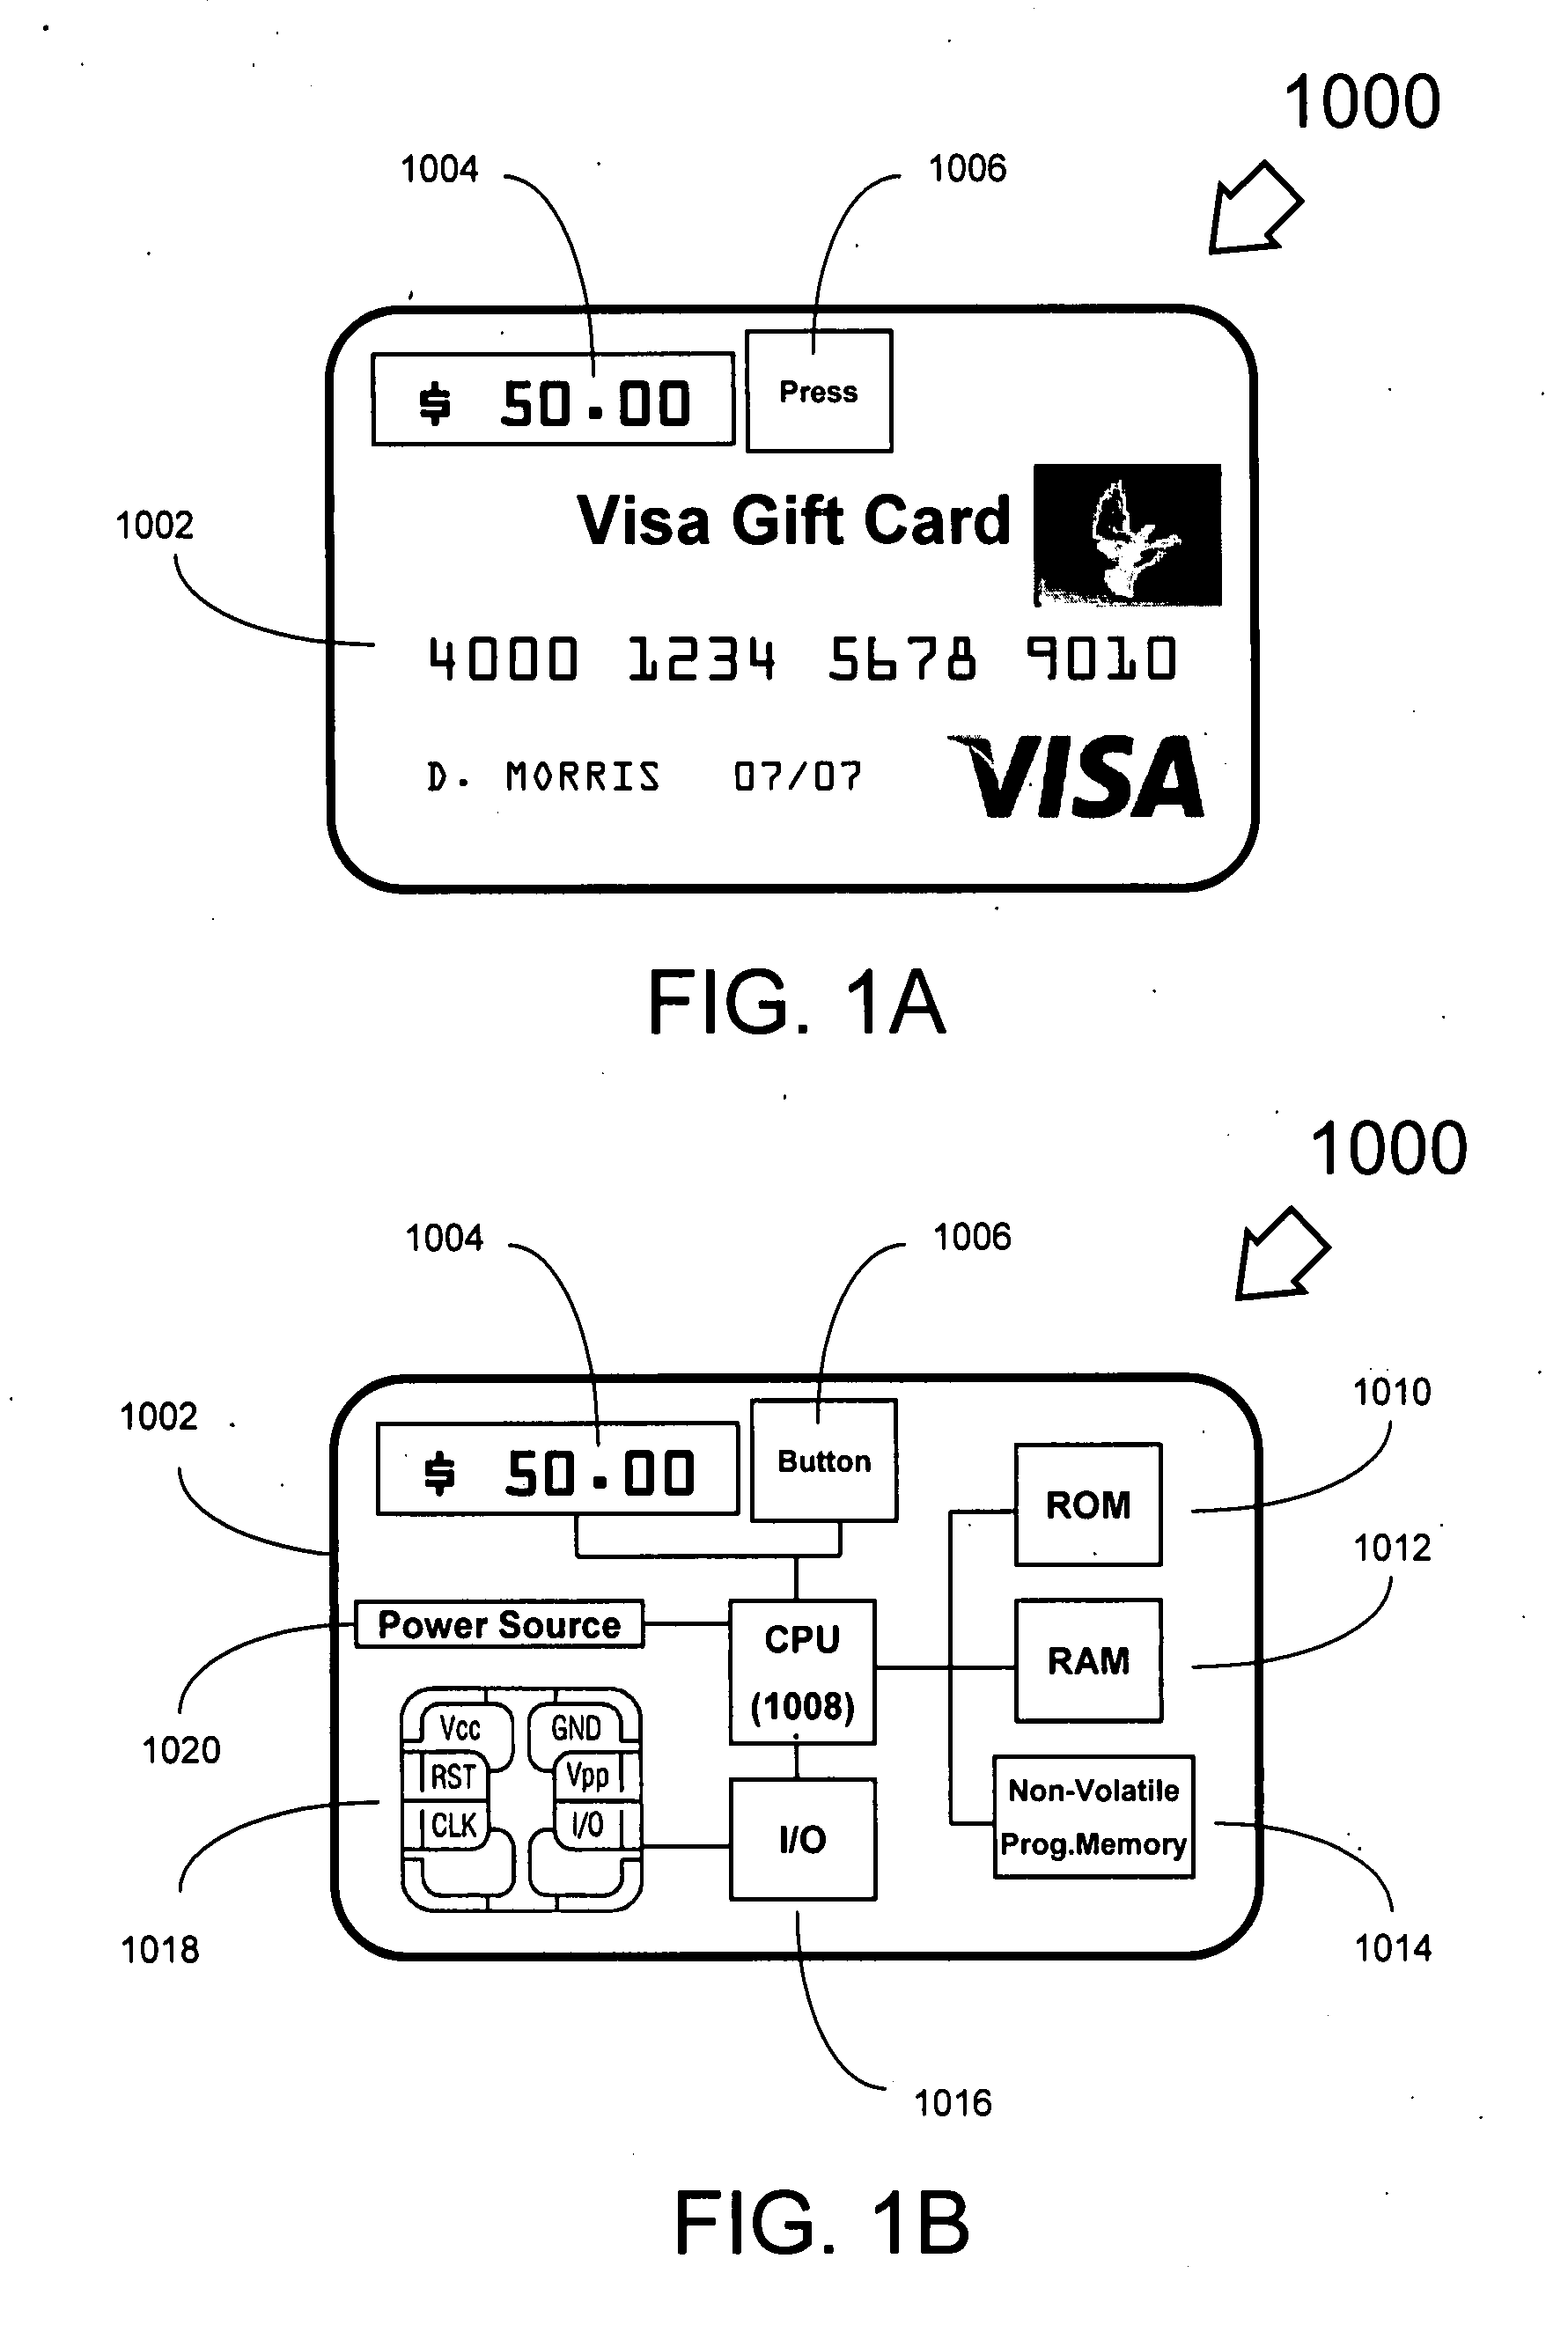 Real-time card balance on card plastic